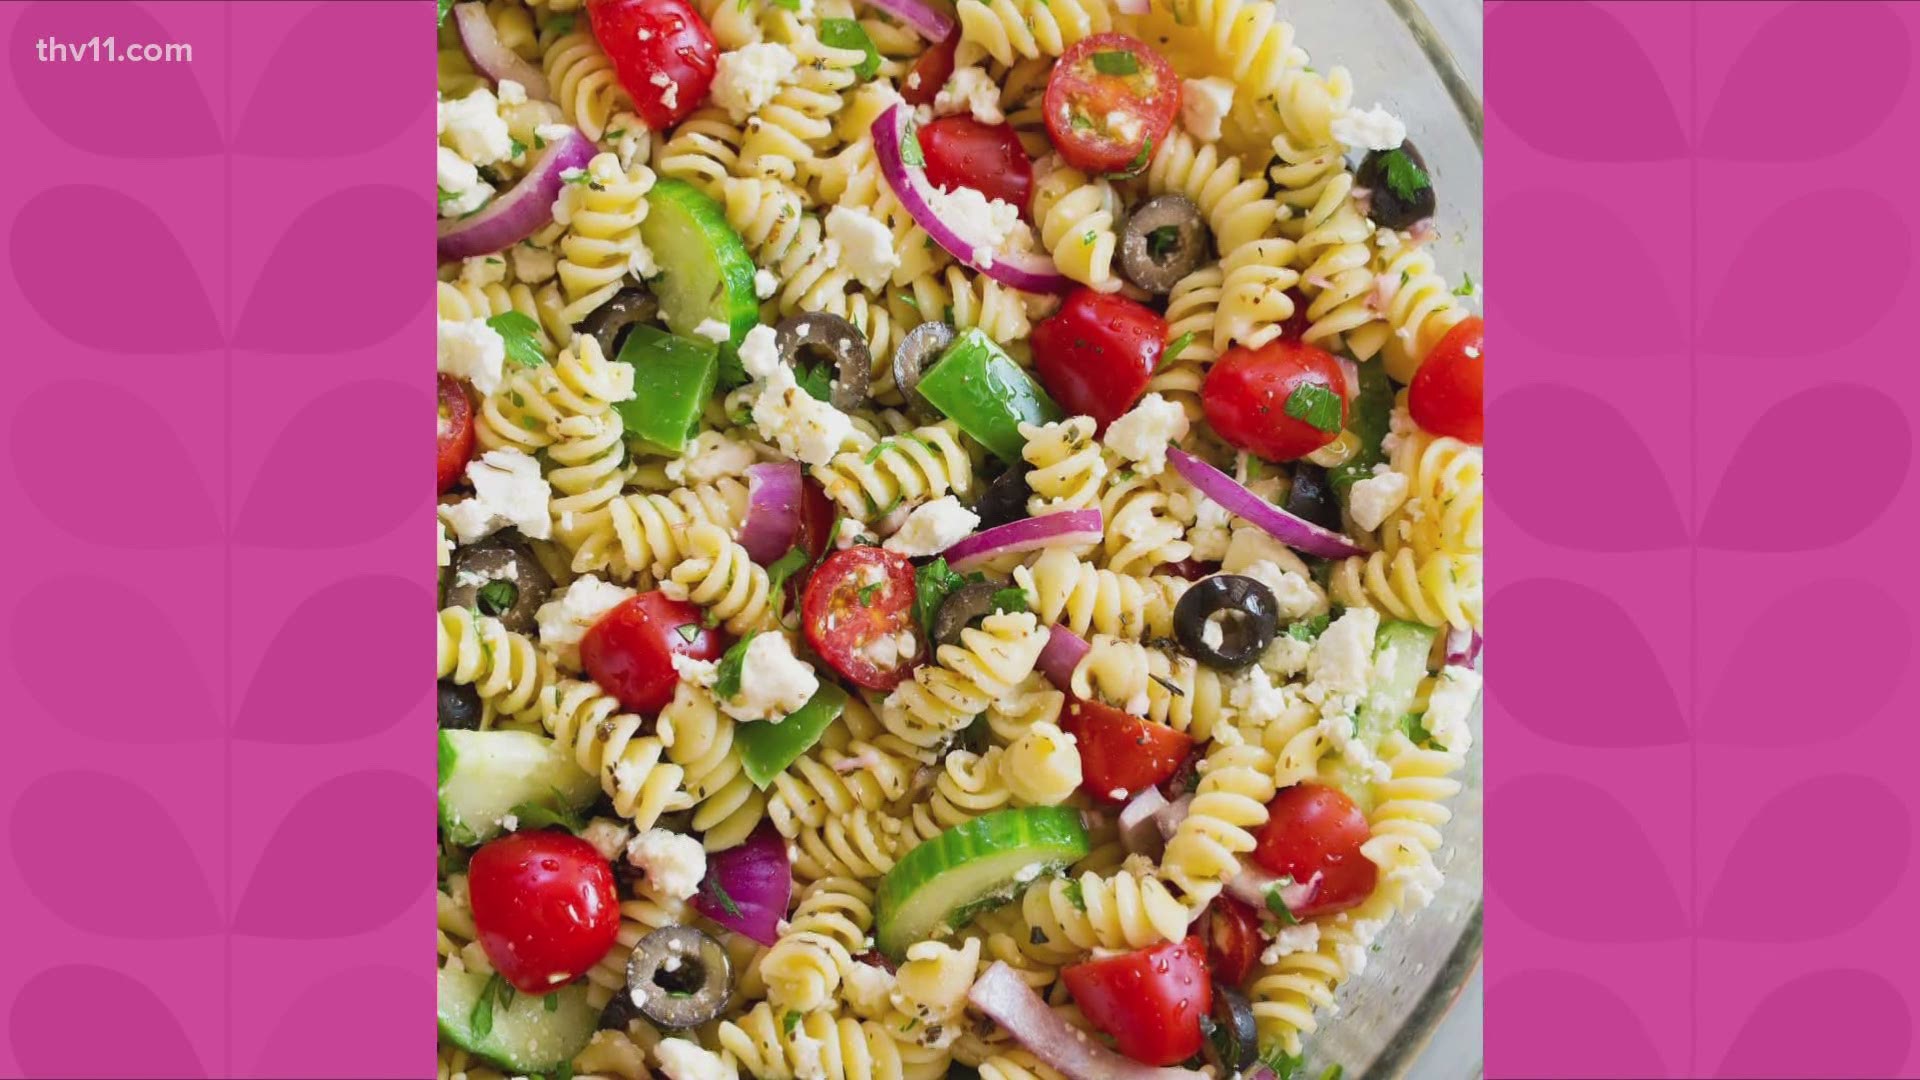 Debbie Arnold with Dining with Debbie shares a recipe for a simple yet delicious Greek pasta salad.